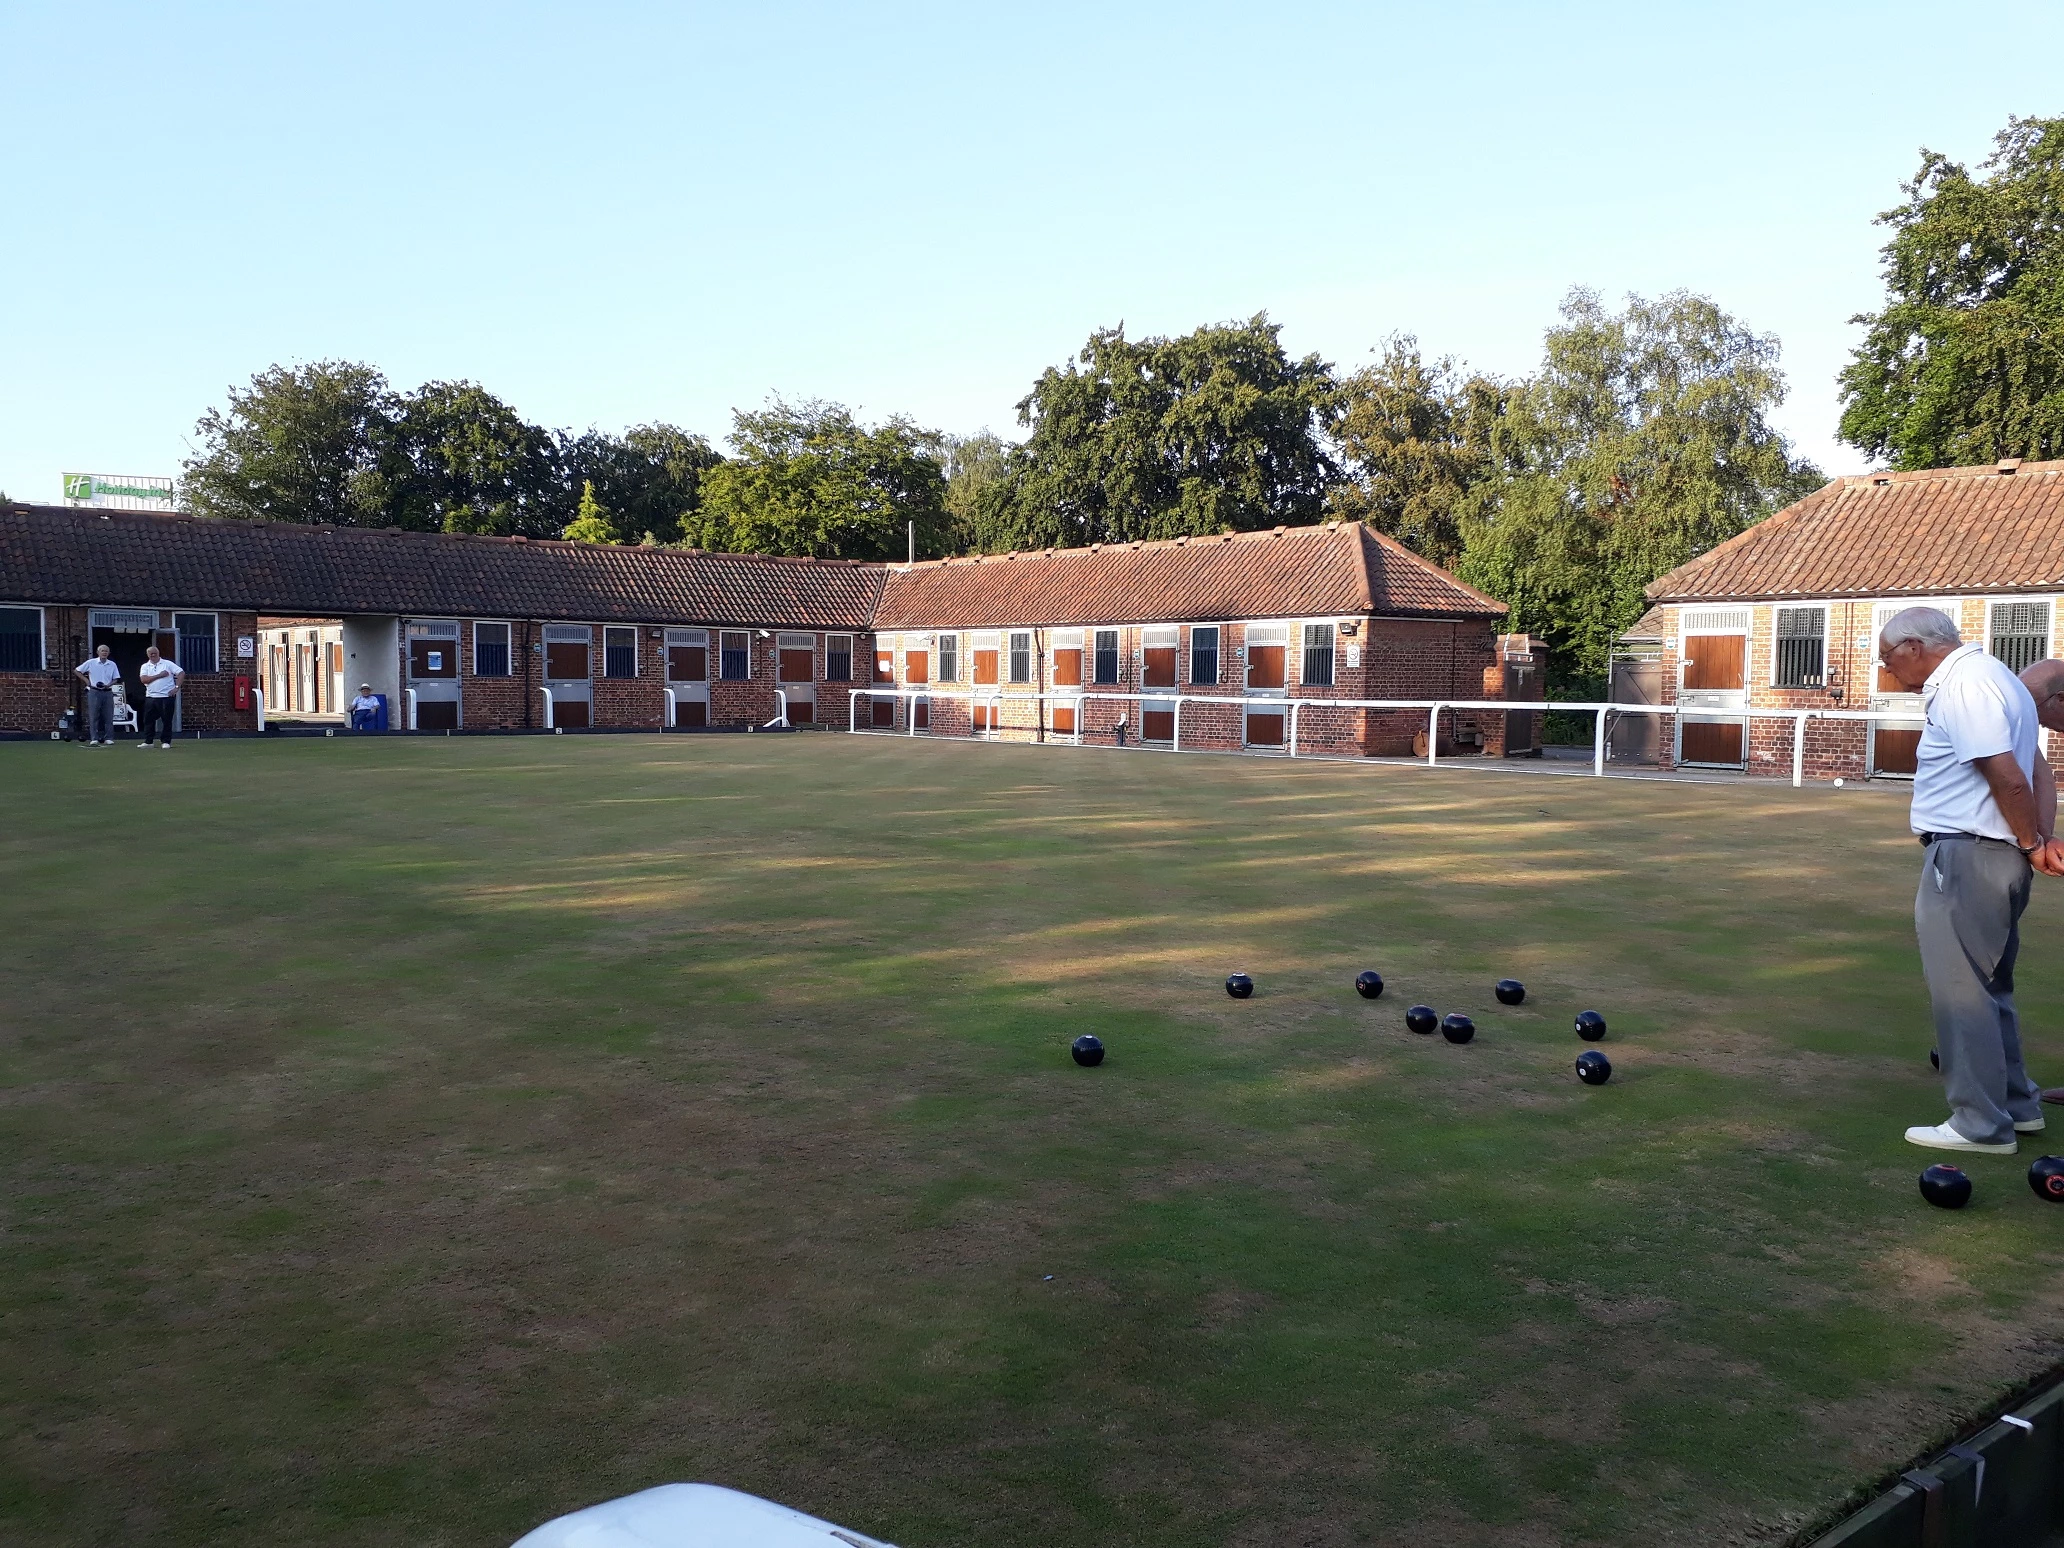 The Dringhouses Bowling Club green